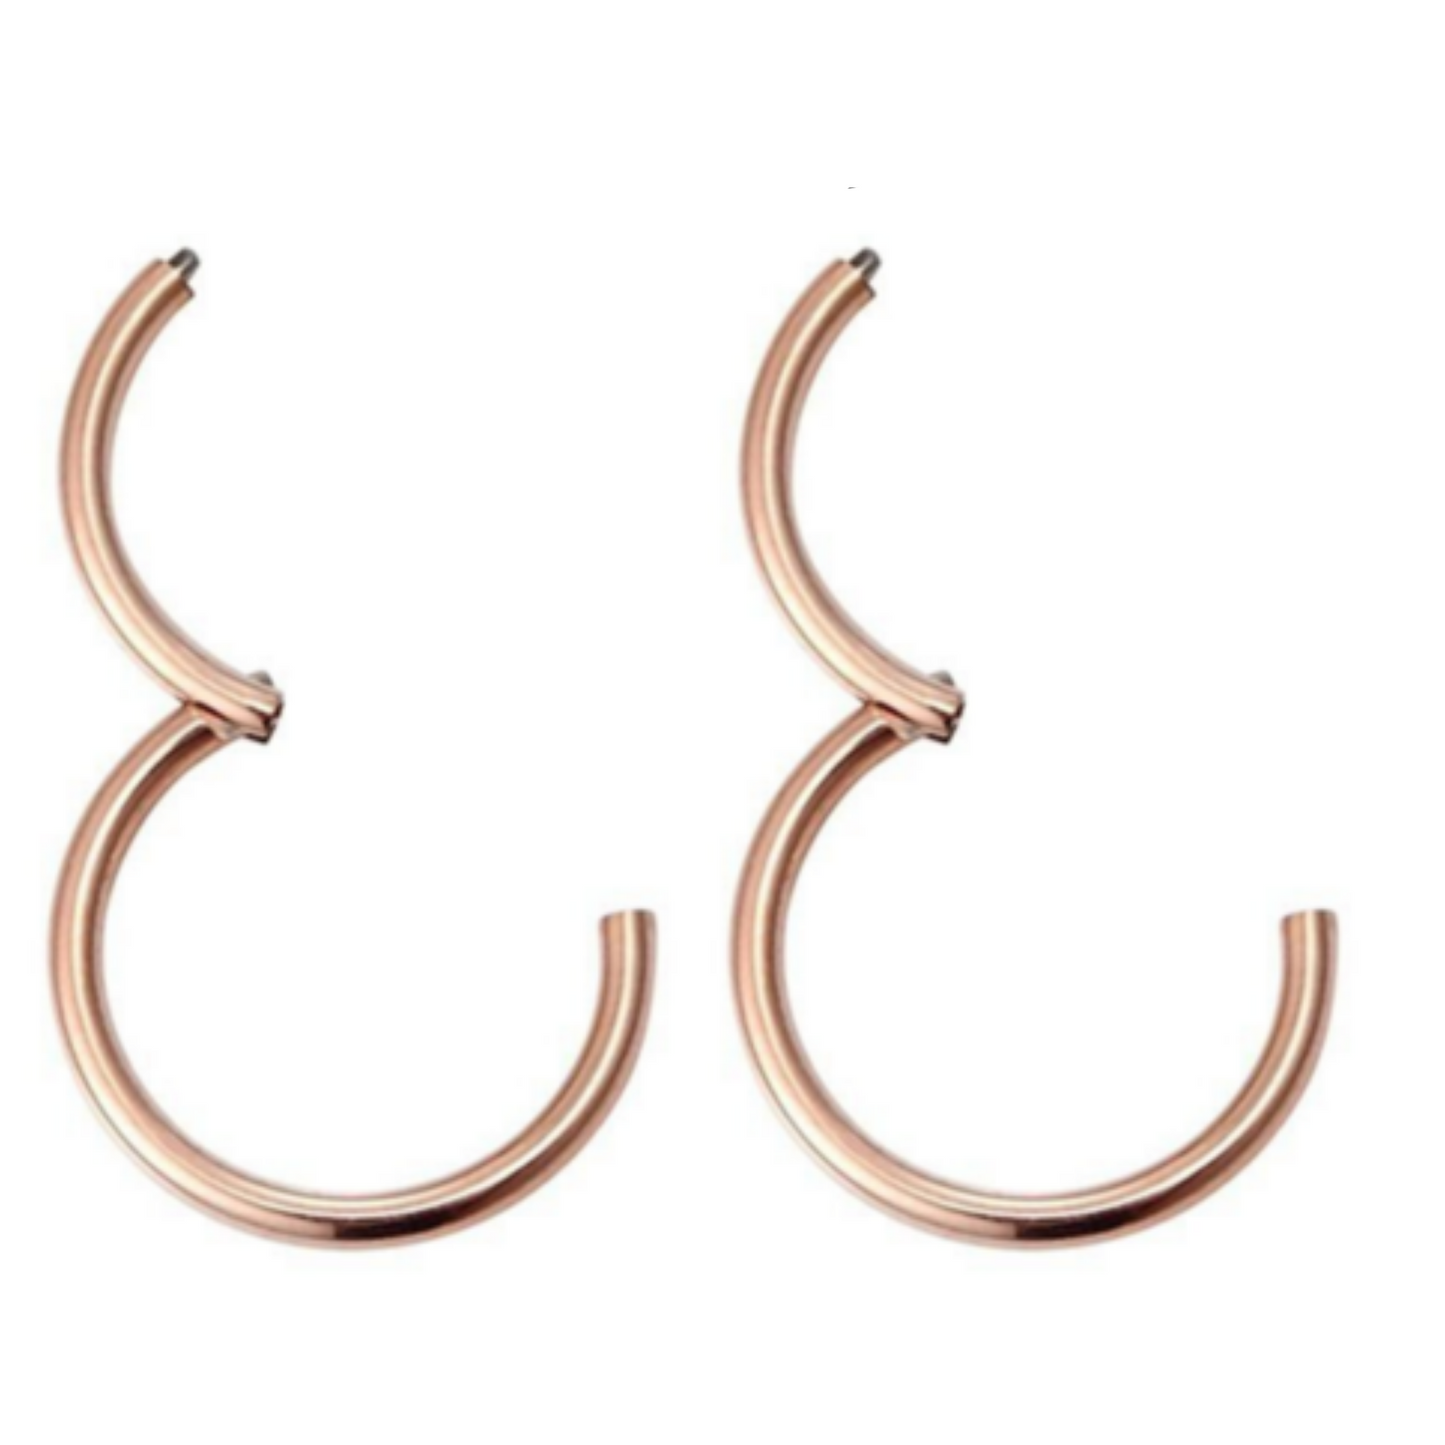 Rose Gold Ion Plated Hinged Segment Clicker Ring